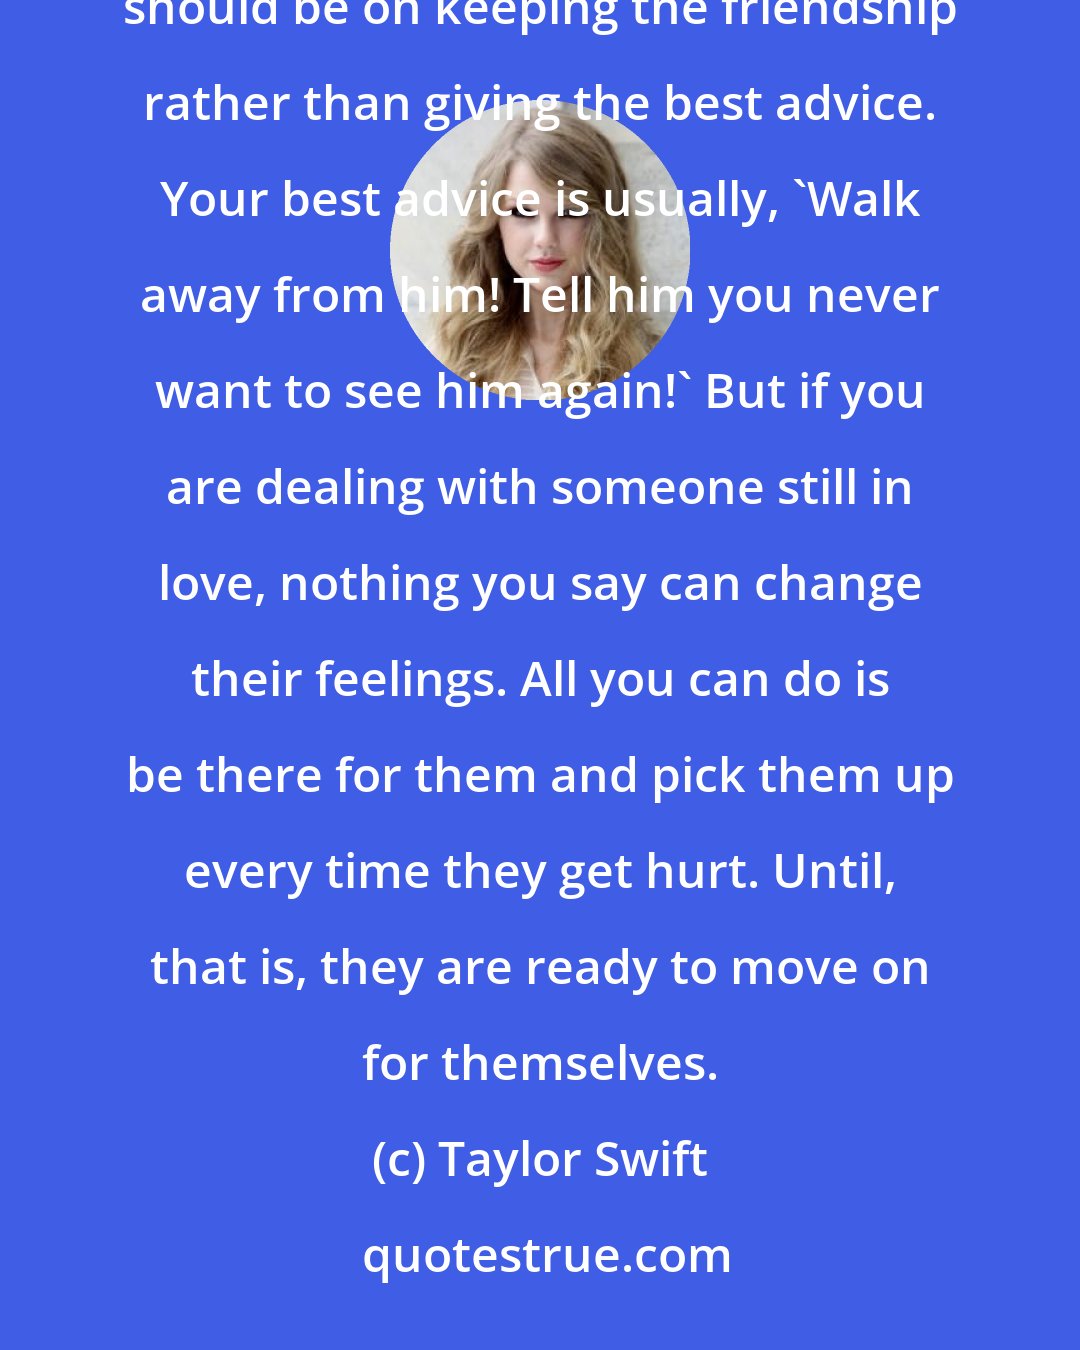 Taylor Swift: Actually, I think you have to know that whatever advice you give, they may not take it. The priority should be on keeping the friendship rather than giving the best advice. Your best advice is usually, 'Walk away from him! Tell him you never want to see him again!' But if you are dealing with someone still in love, nothing you say can change their feelings. All you can do is be there for them and pick them up every time they get hurt. Until, that is, they are ready to move on for themselves.